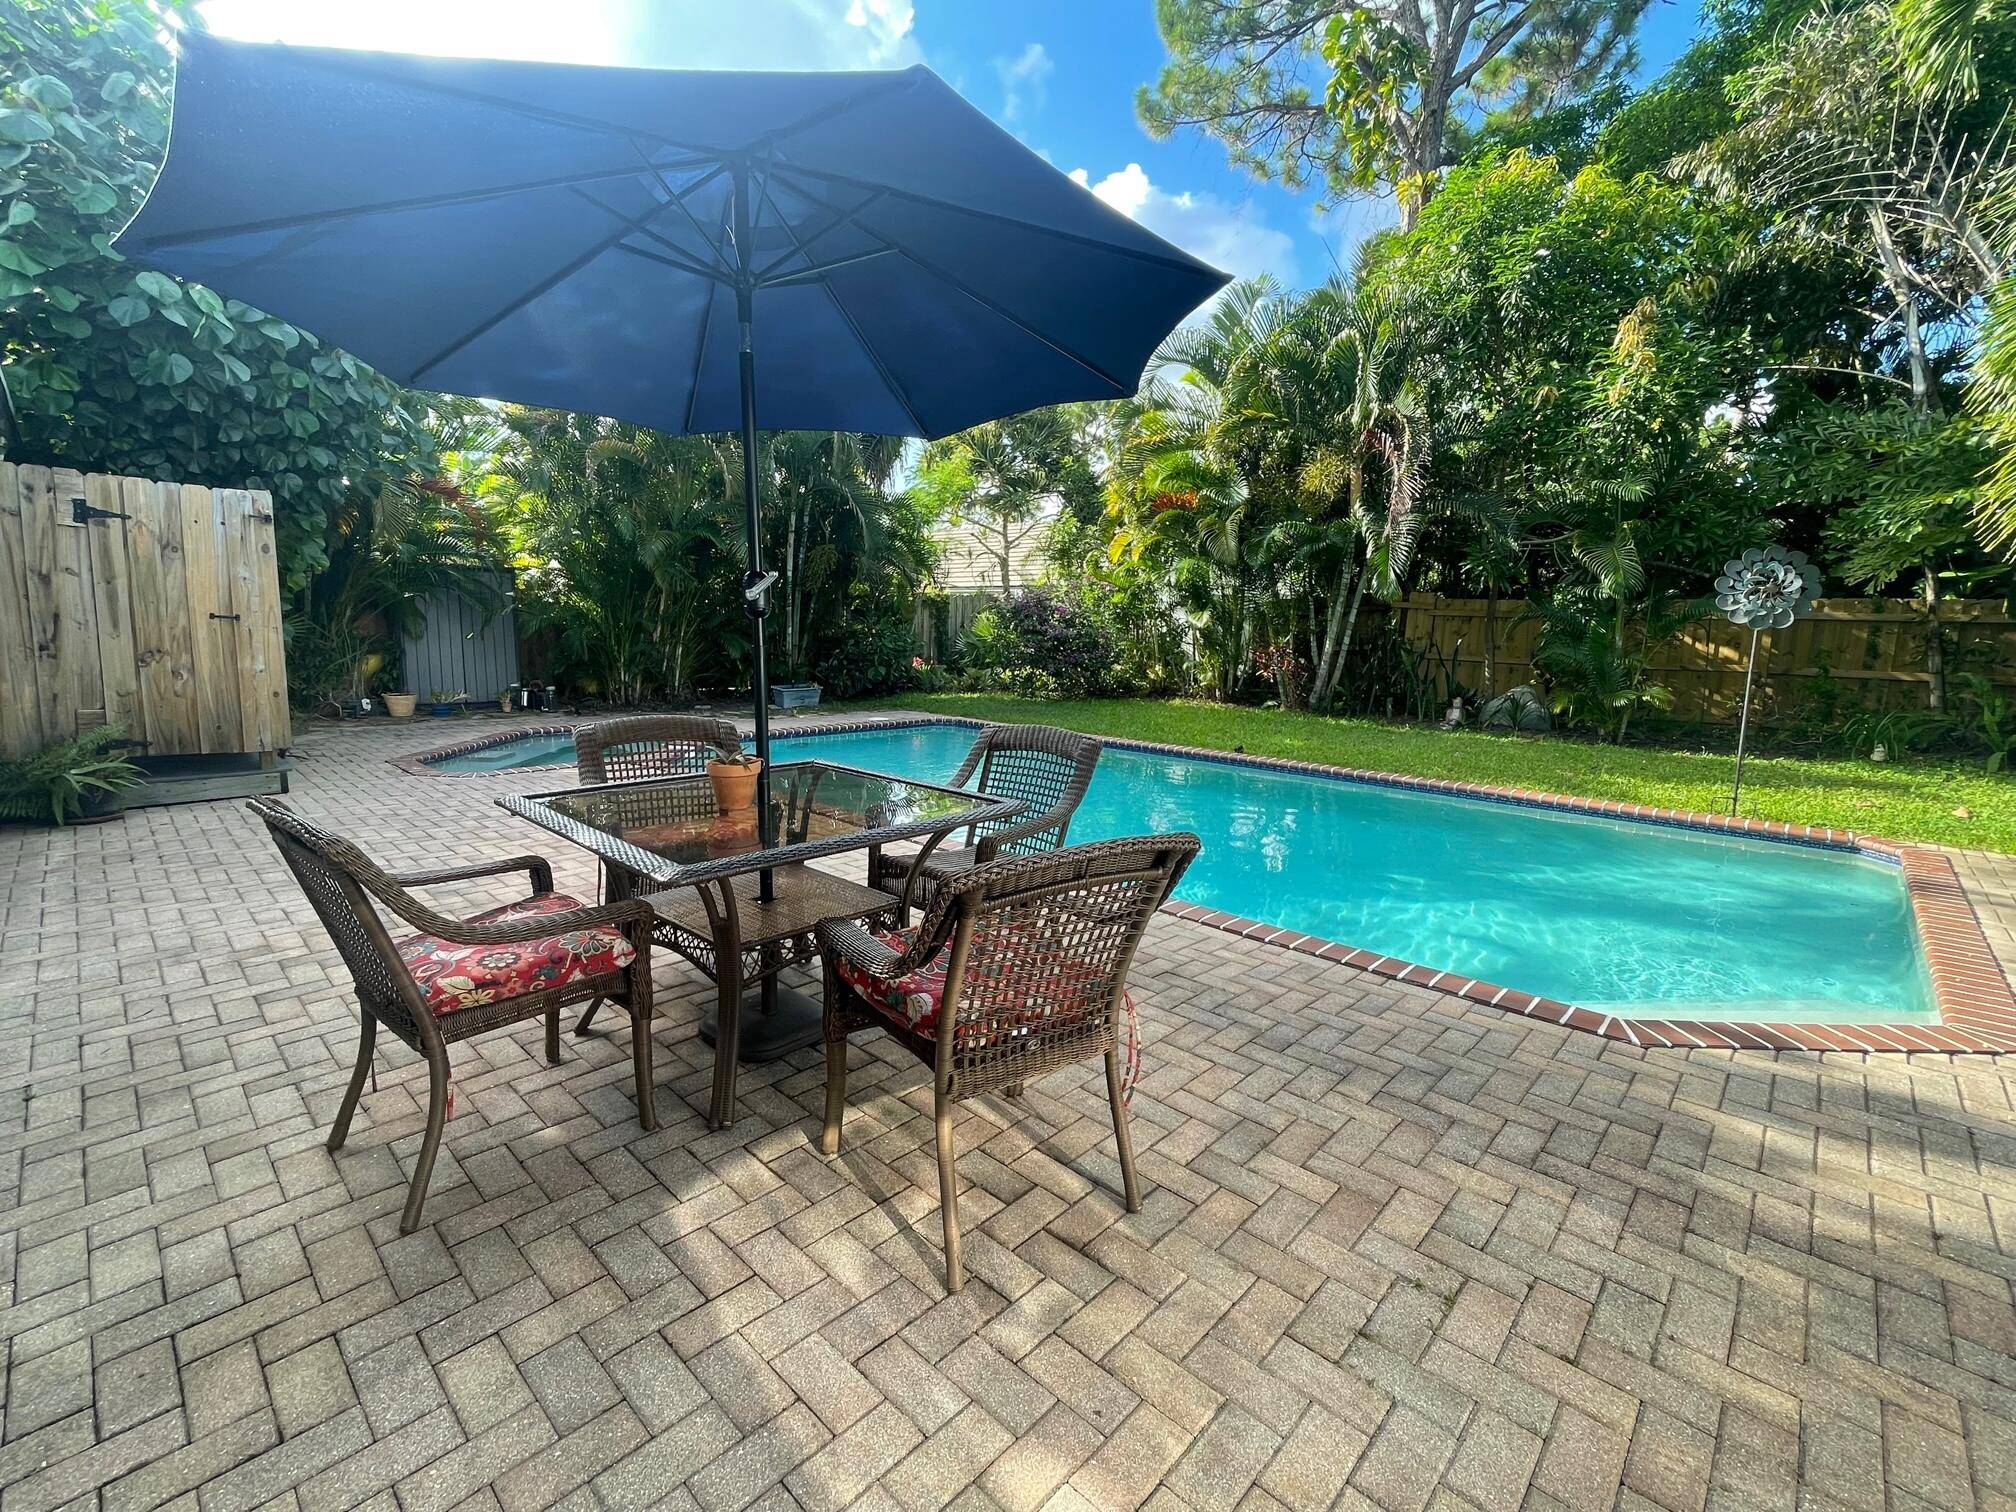 Find more to love in this charming home with private solar heated saltwater pool and spa located on a cul de sac in the desirable Sunflower Delray neighborhood.